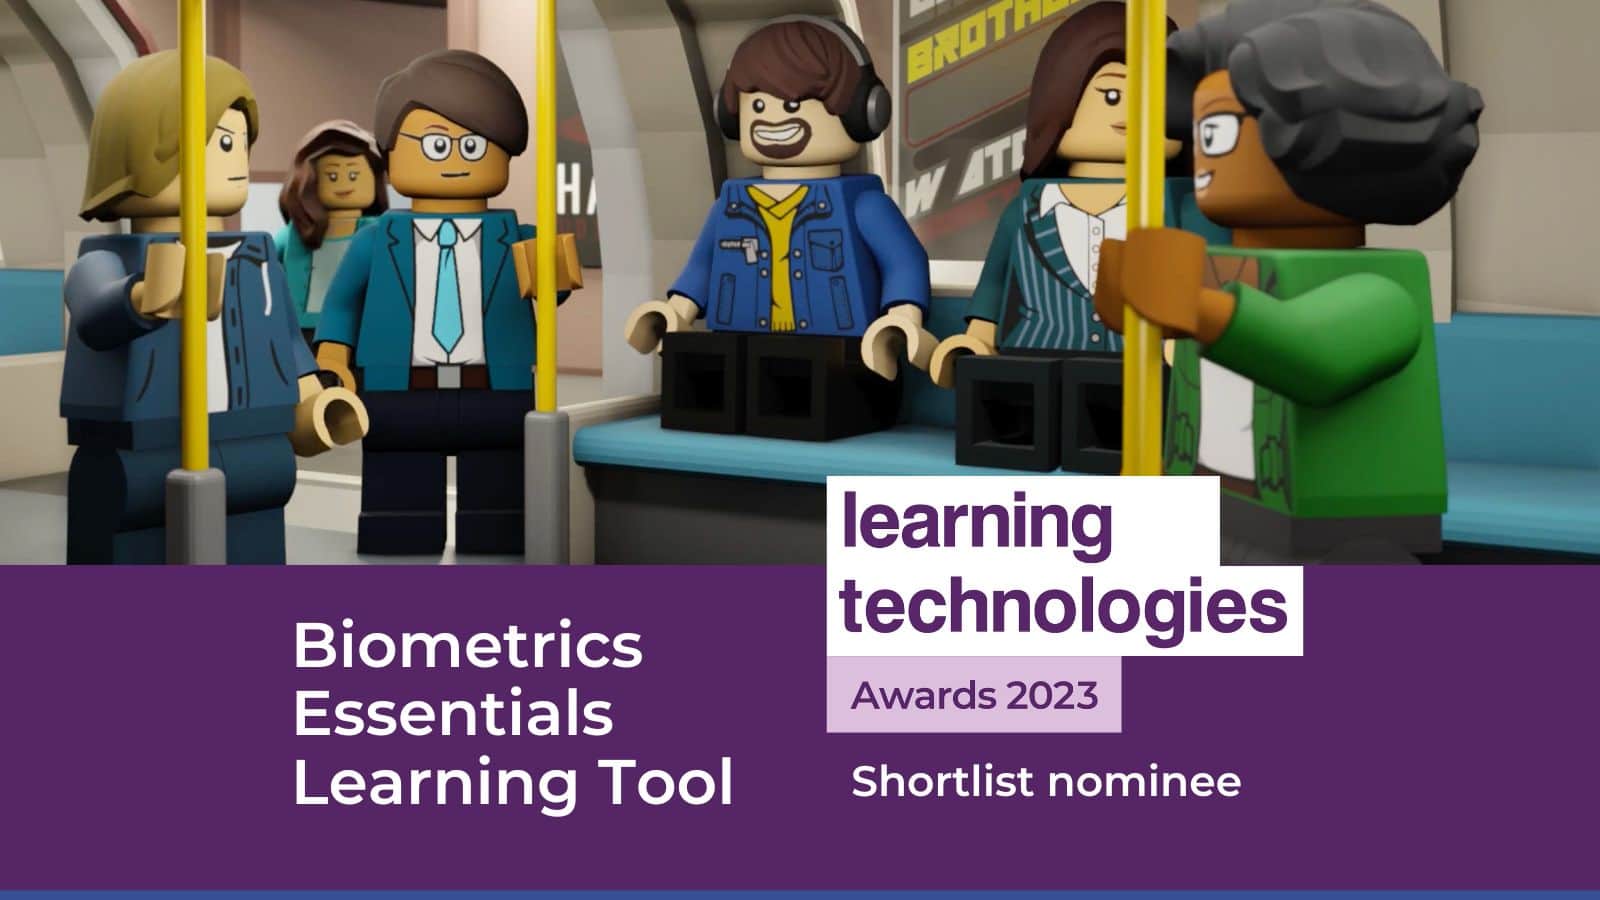 Biometrics Essentials learning tool shortlisted shortlisted in the Learning Technologies Awards 2023